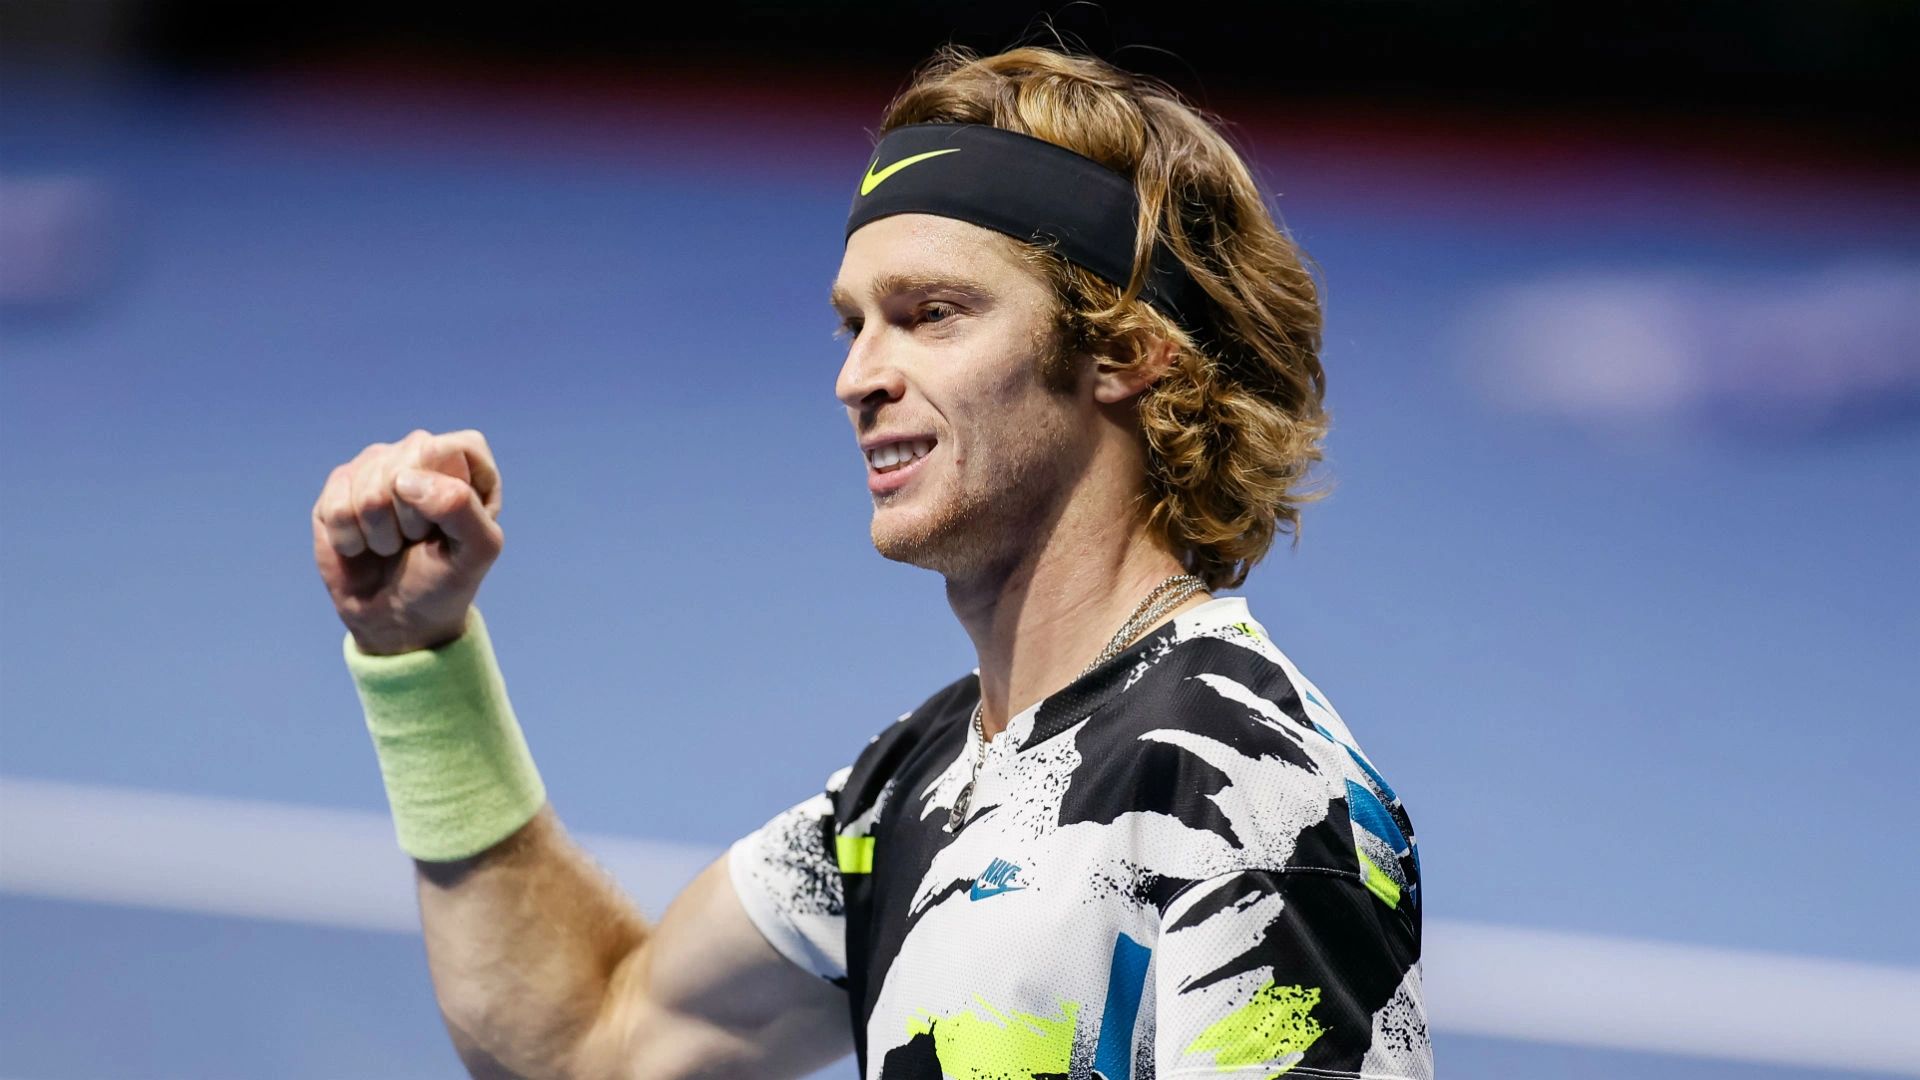 Rublev defeats Rune in the Monte-Carlo Masters final